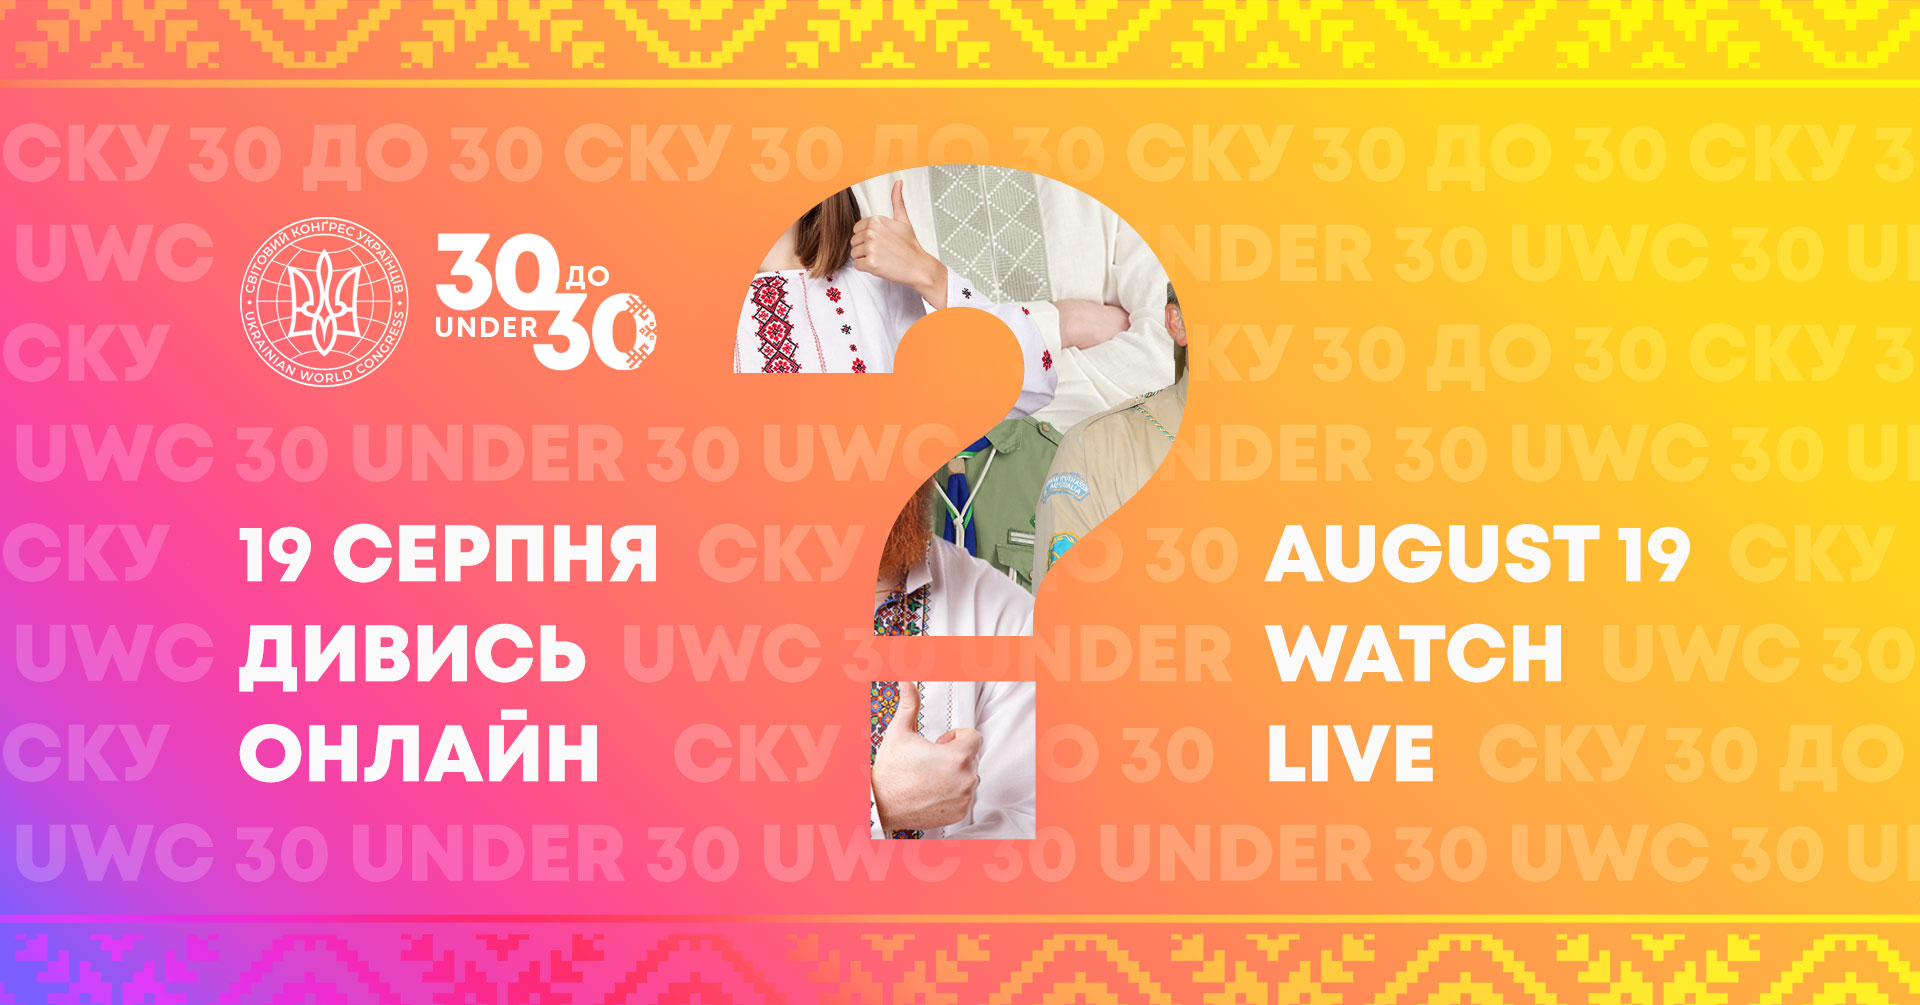 “UWC: 30 Under 30” youth initiative shortlist reveal will take place on August 19th